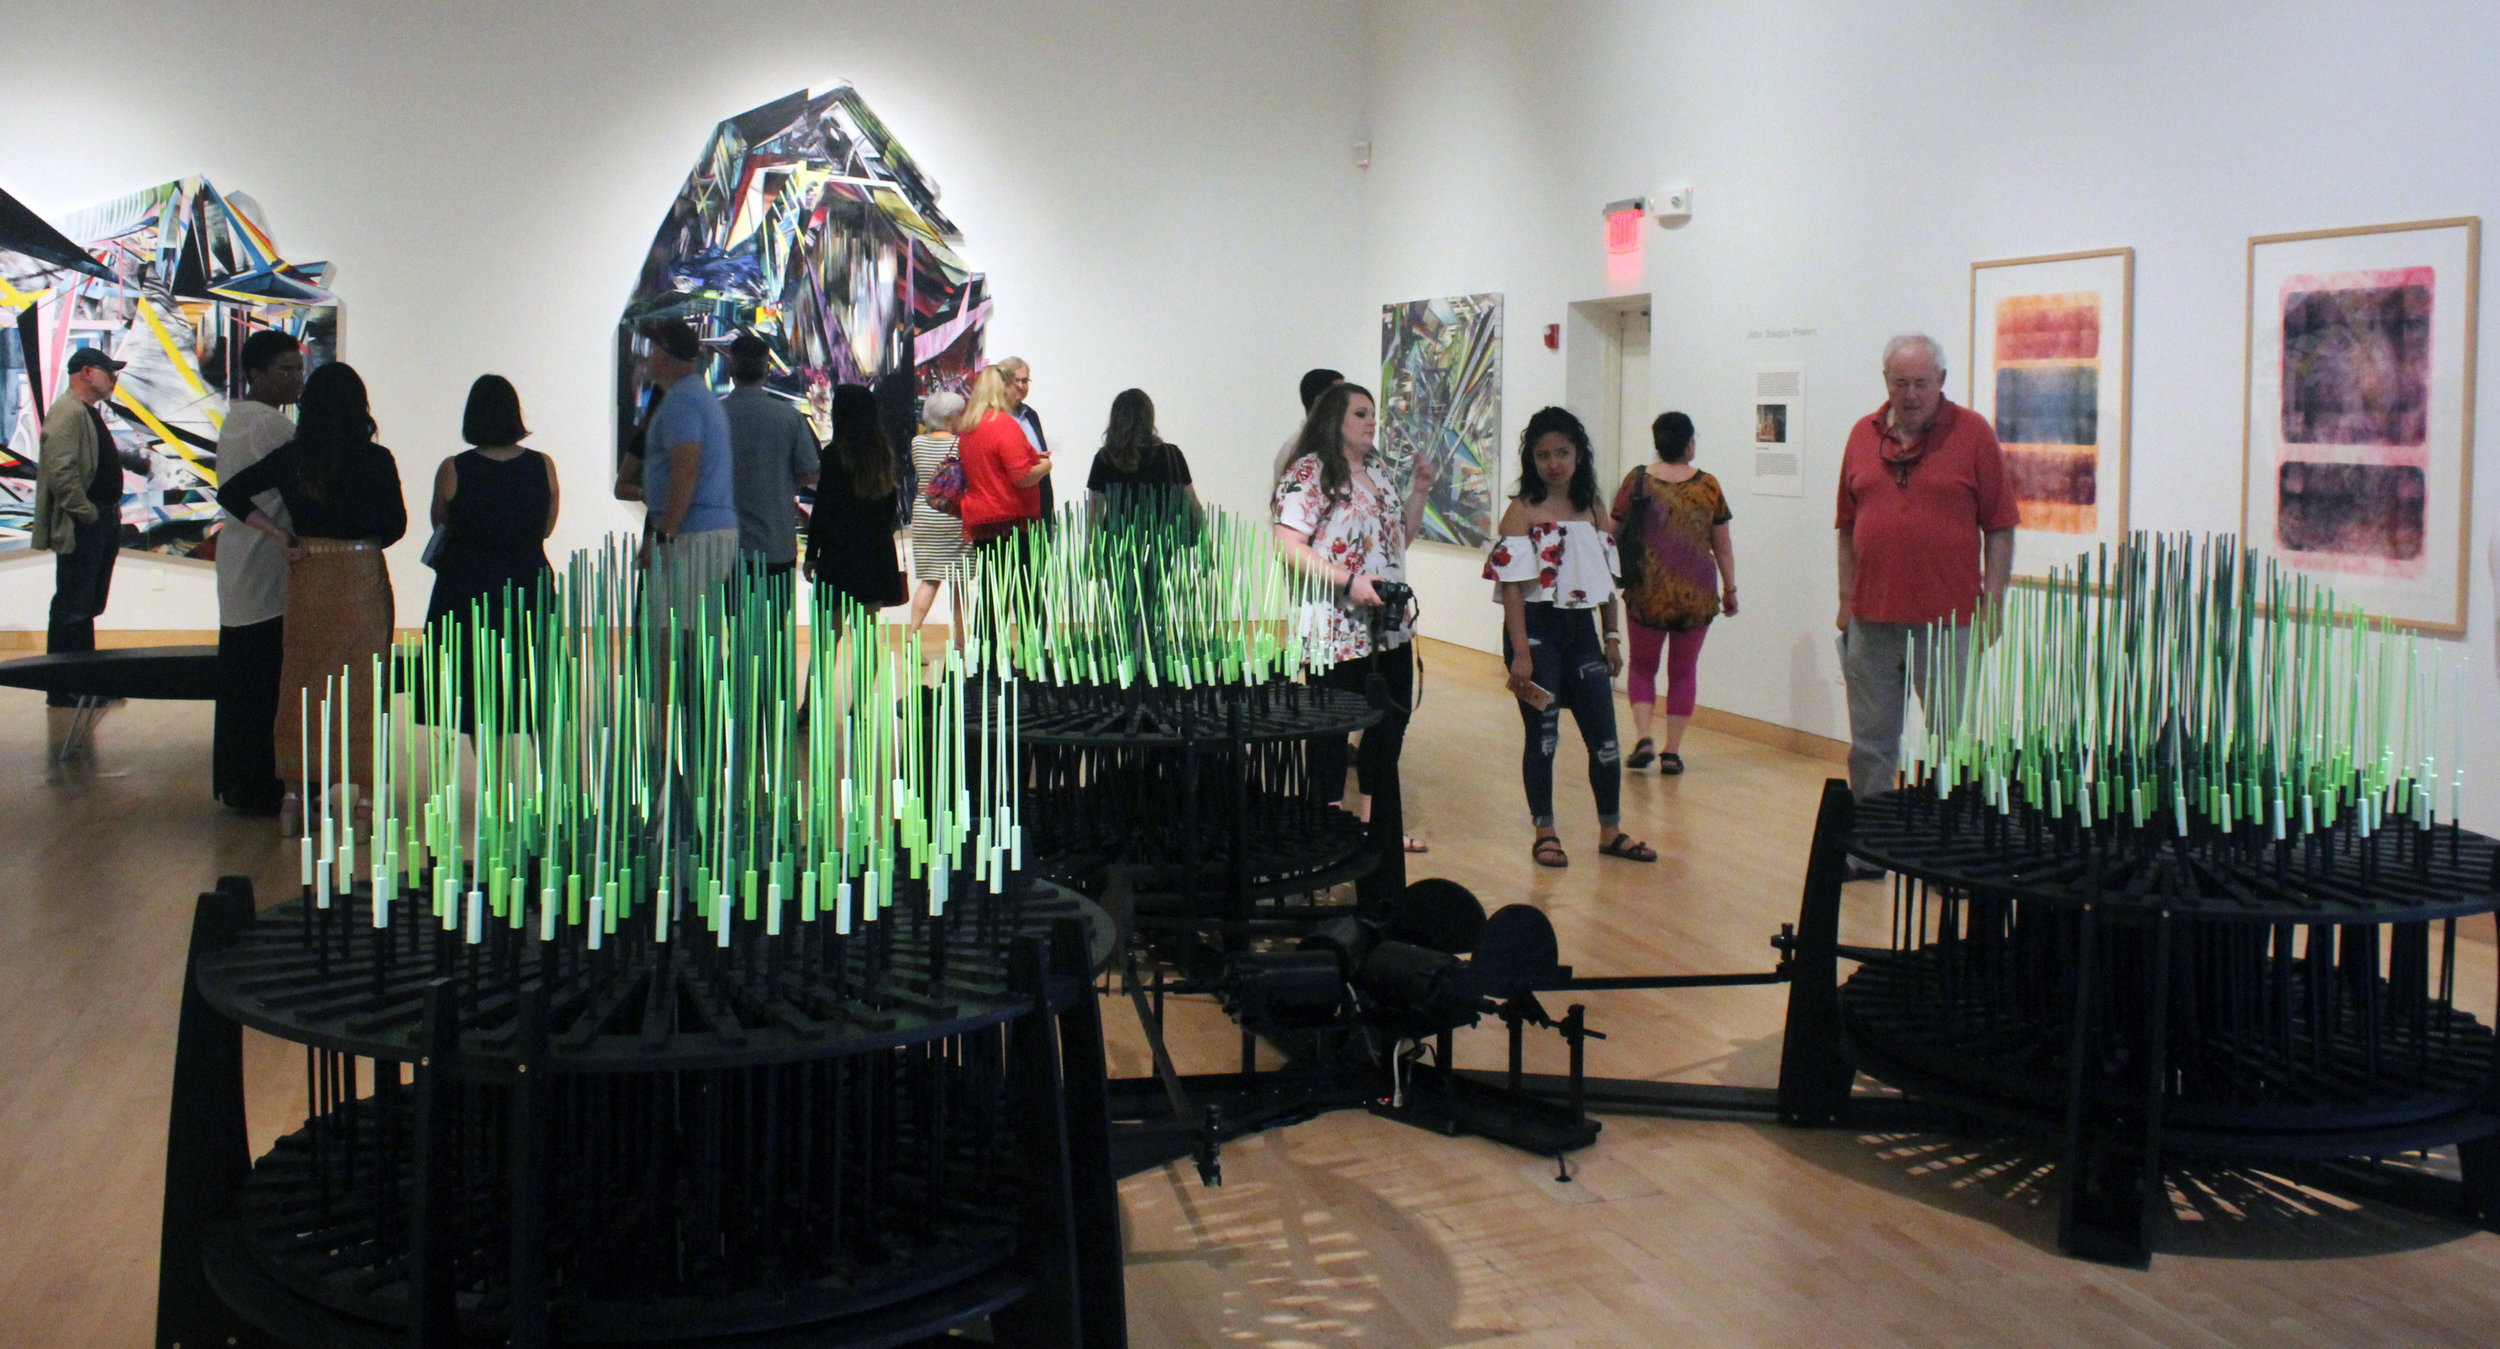 People view a gallery with 3D pieces that are large and circular with protruding slender blue and green rods.